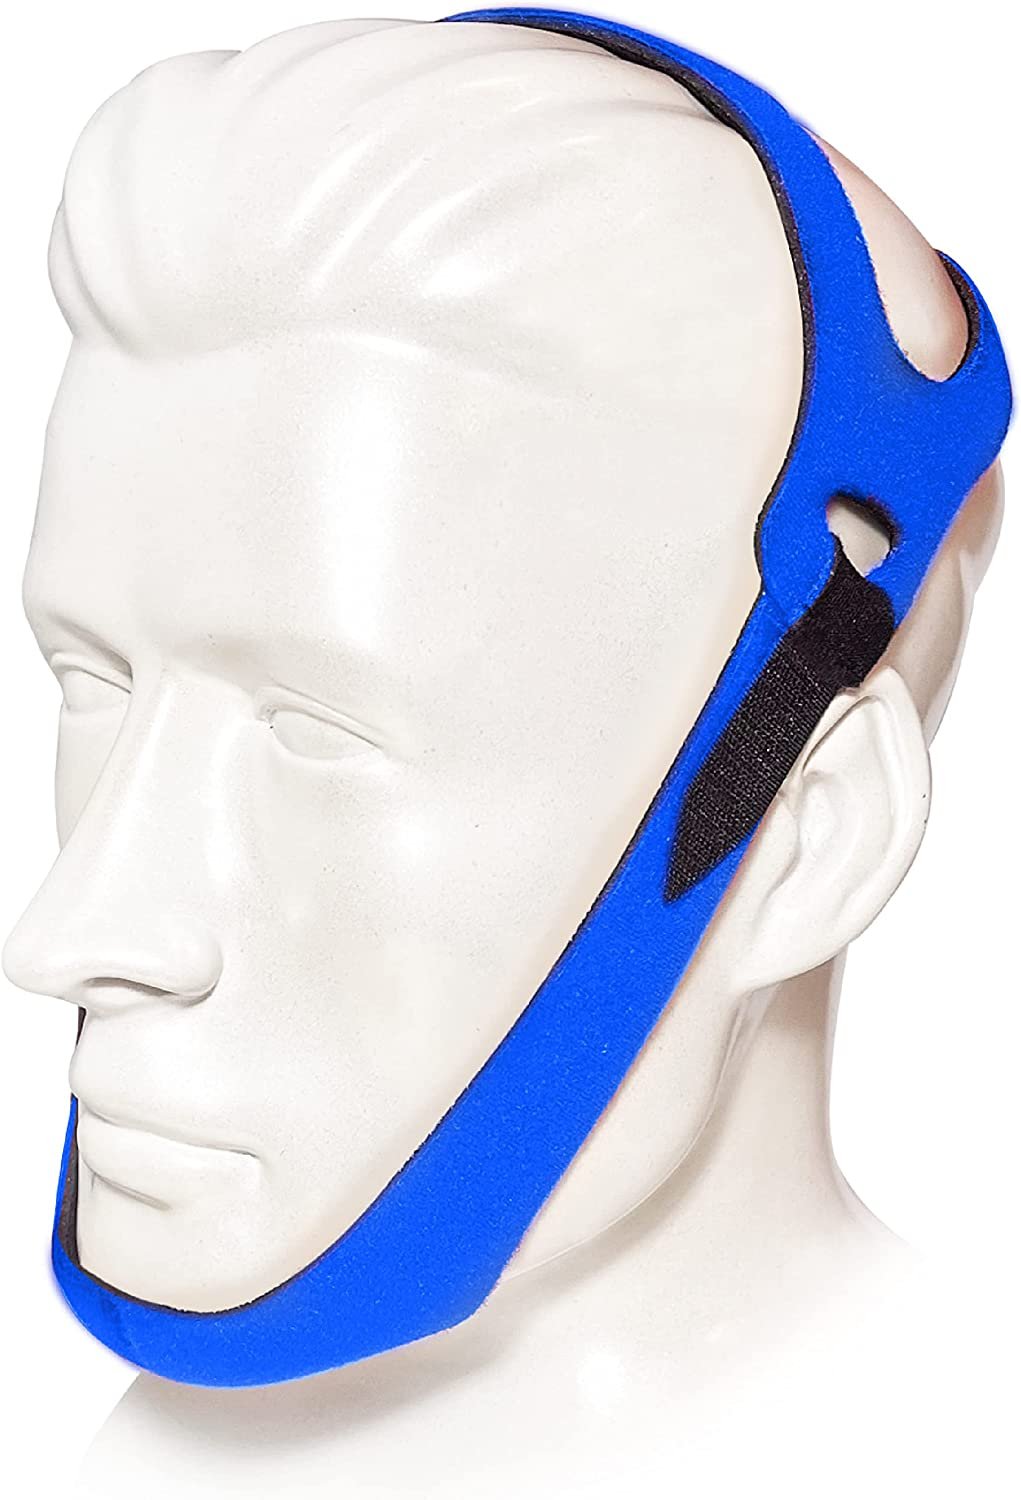 resplabs Halo Chin Strap for CPAP Users - 2 Pack - This is Not Another Anti Snoring Chinstrap - Sleep Technologies